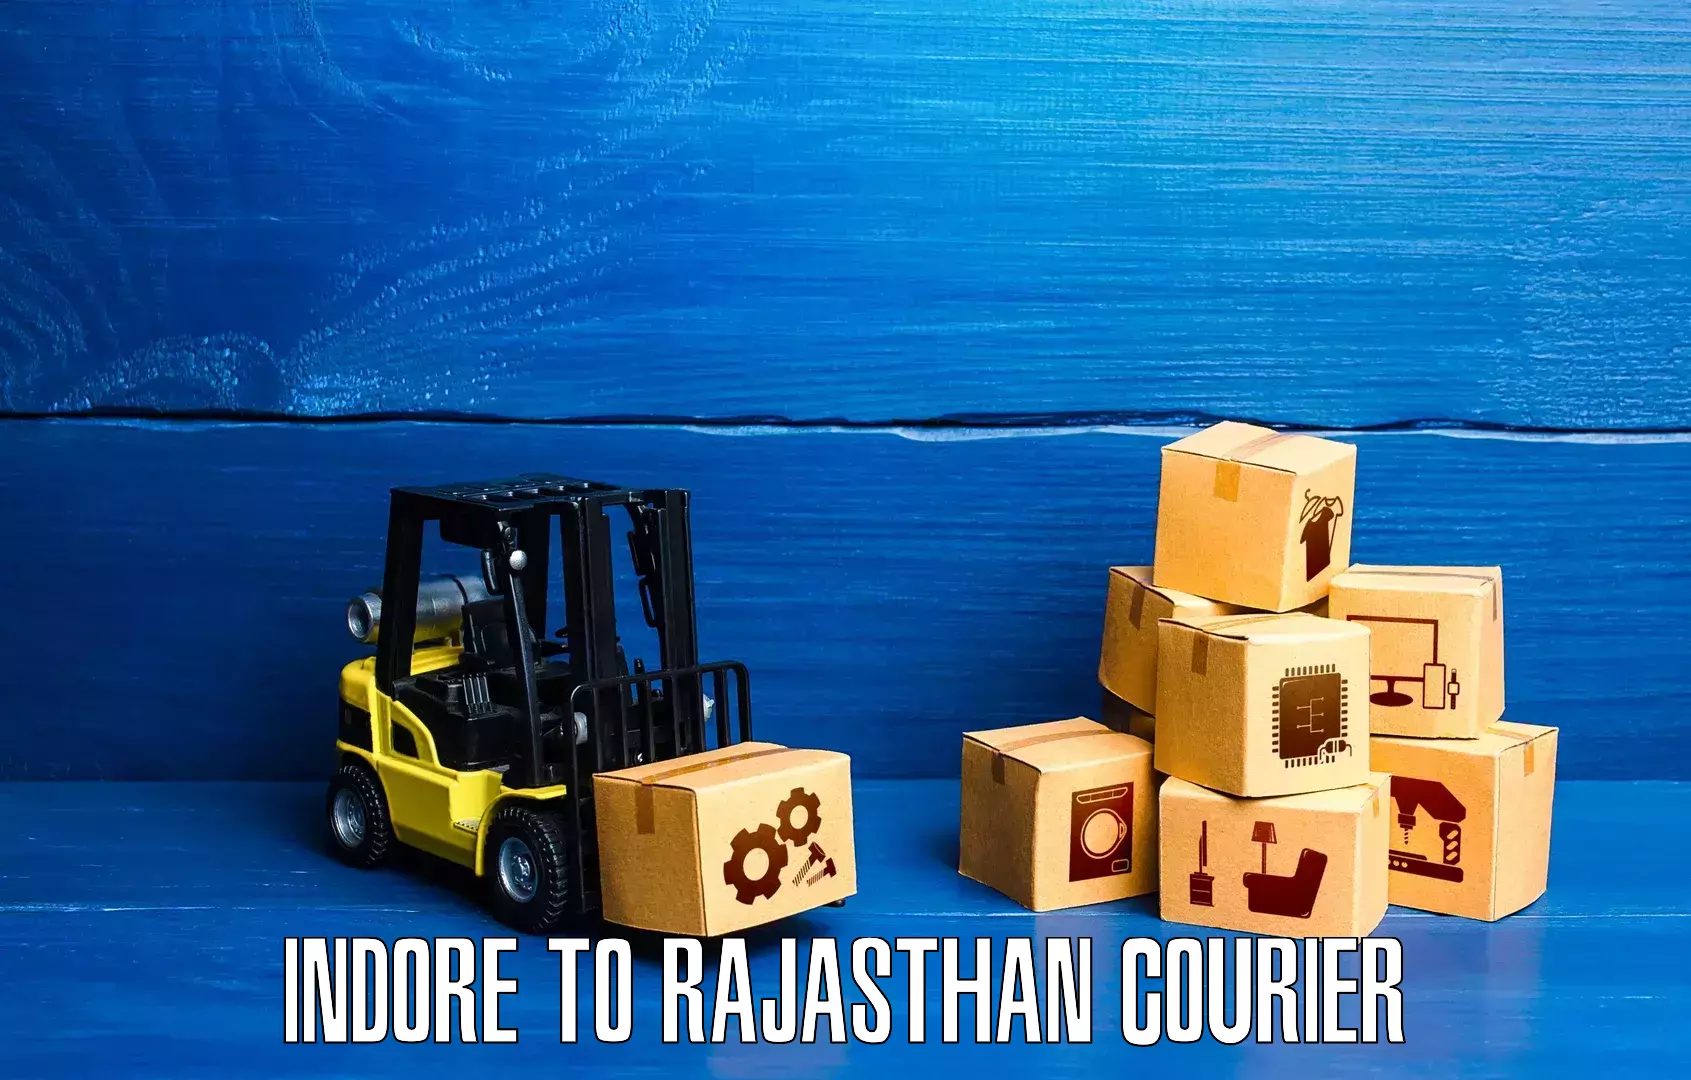 Courier service innovation Indore to Rajasthan